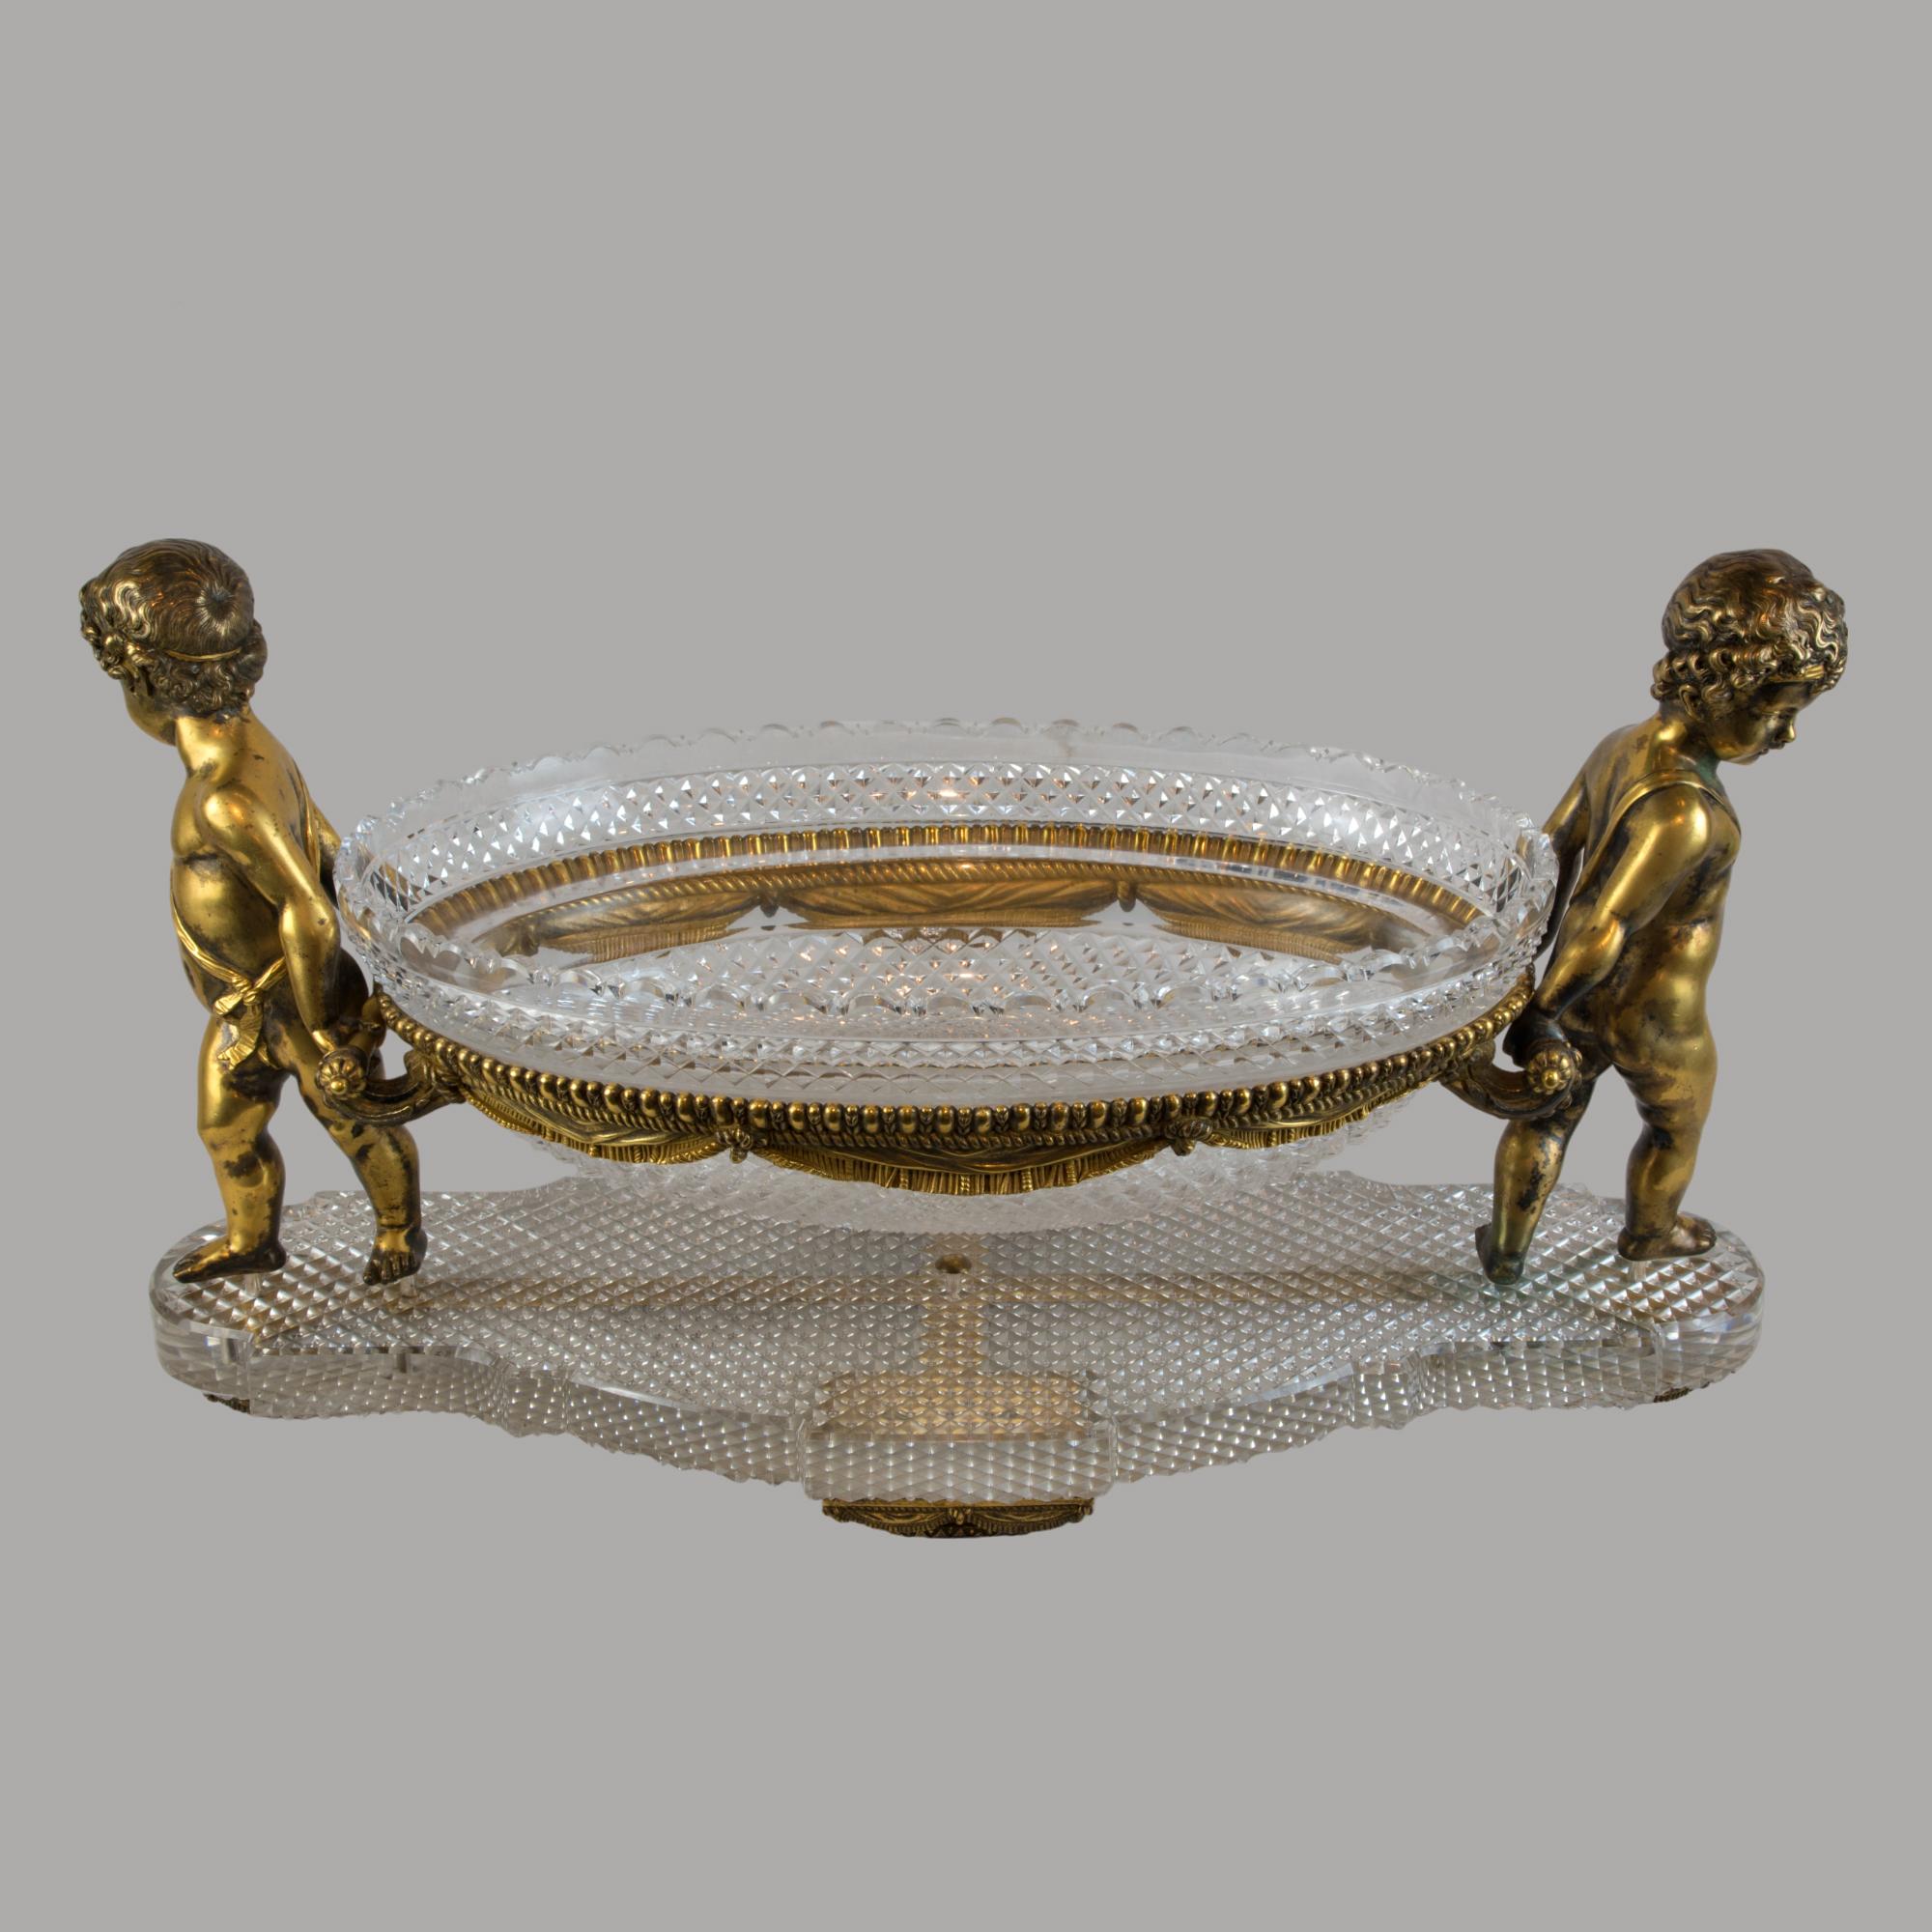 Louis XVI Style Gilt-Bronze and Cut Glass Figural Centerpiece att. to Baccarat In Excellent Condition For Sale In New York, NY